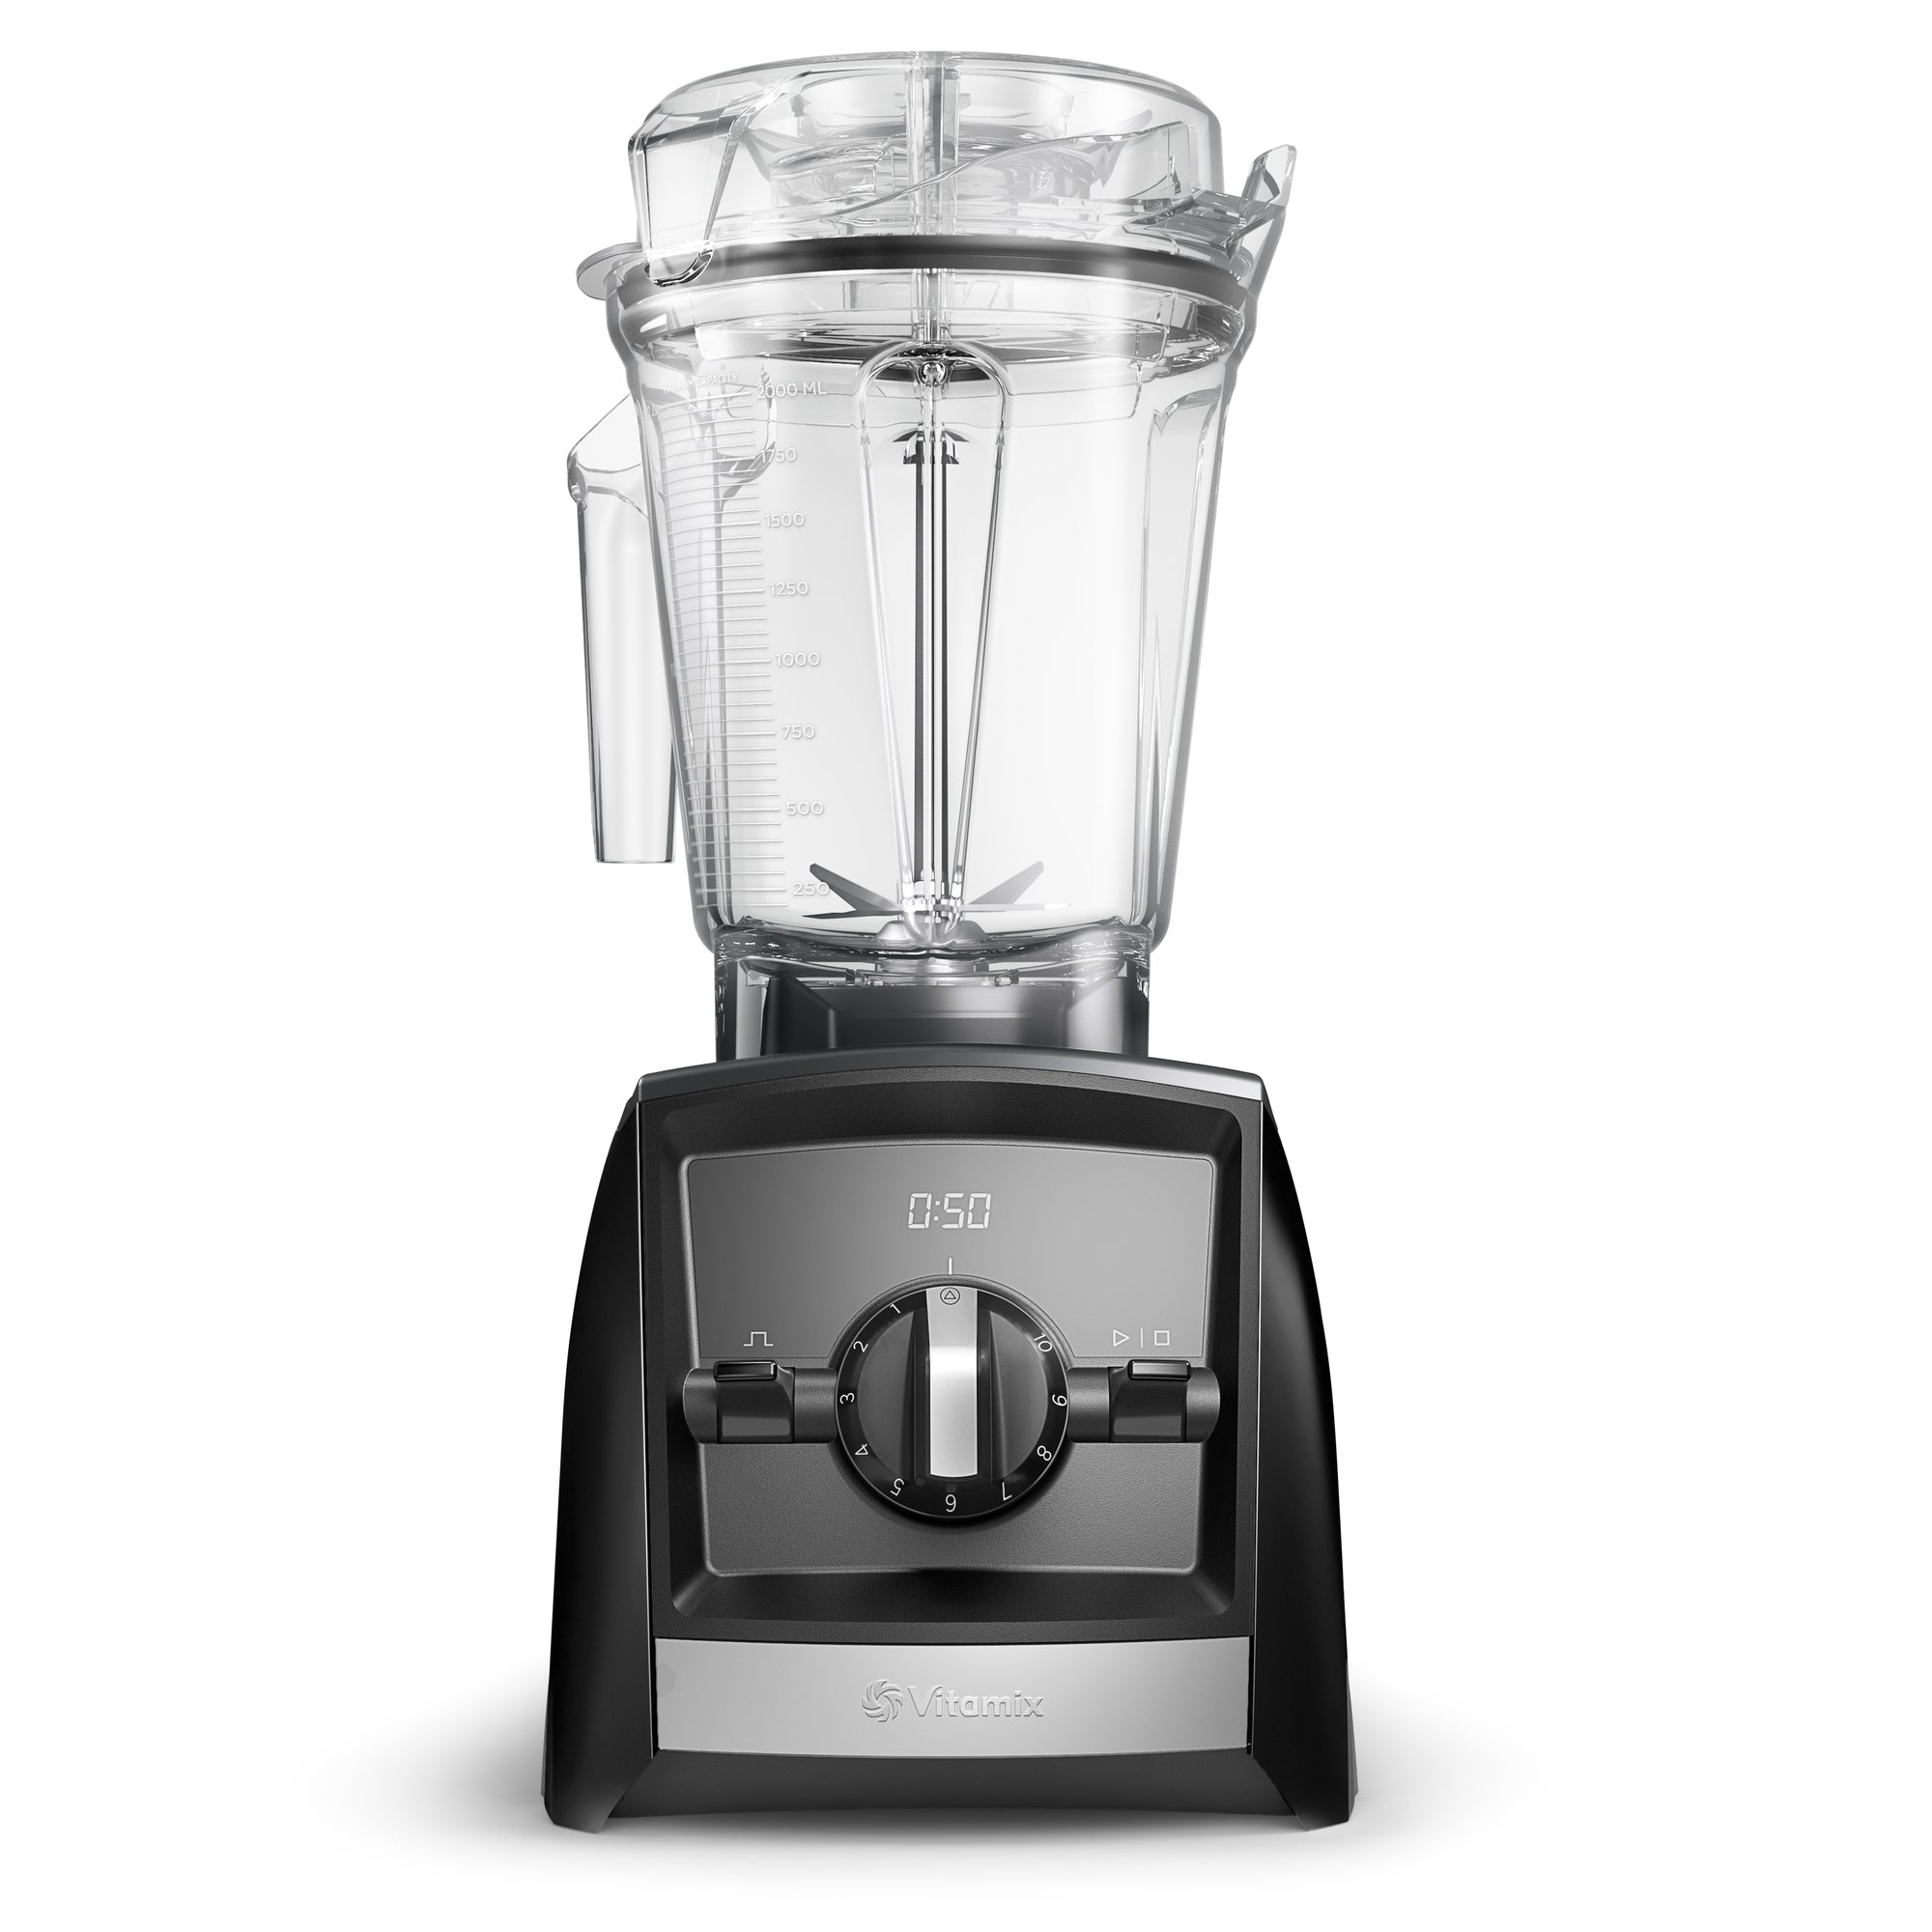 Conair Waring Blender, Glass Container Glass container for 1L blender:Mixers